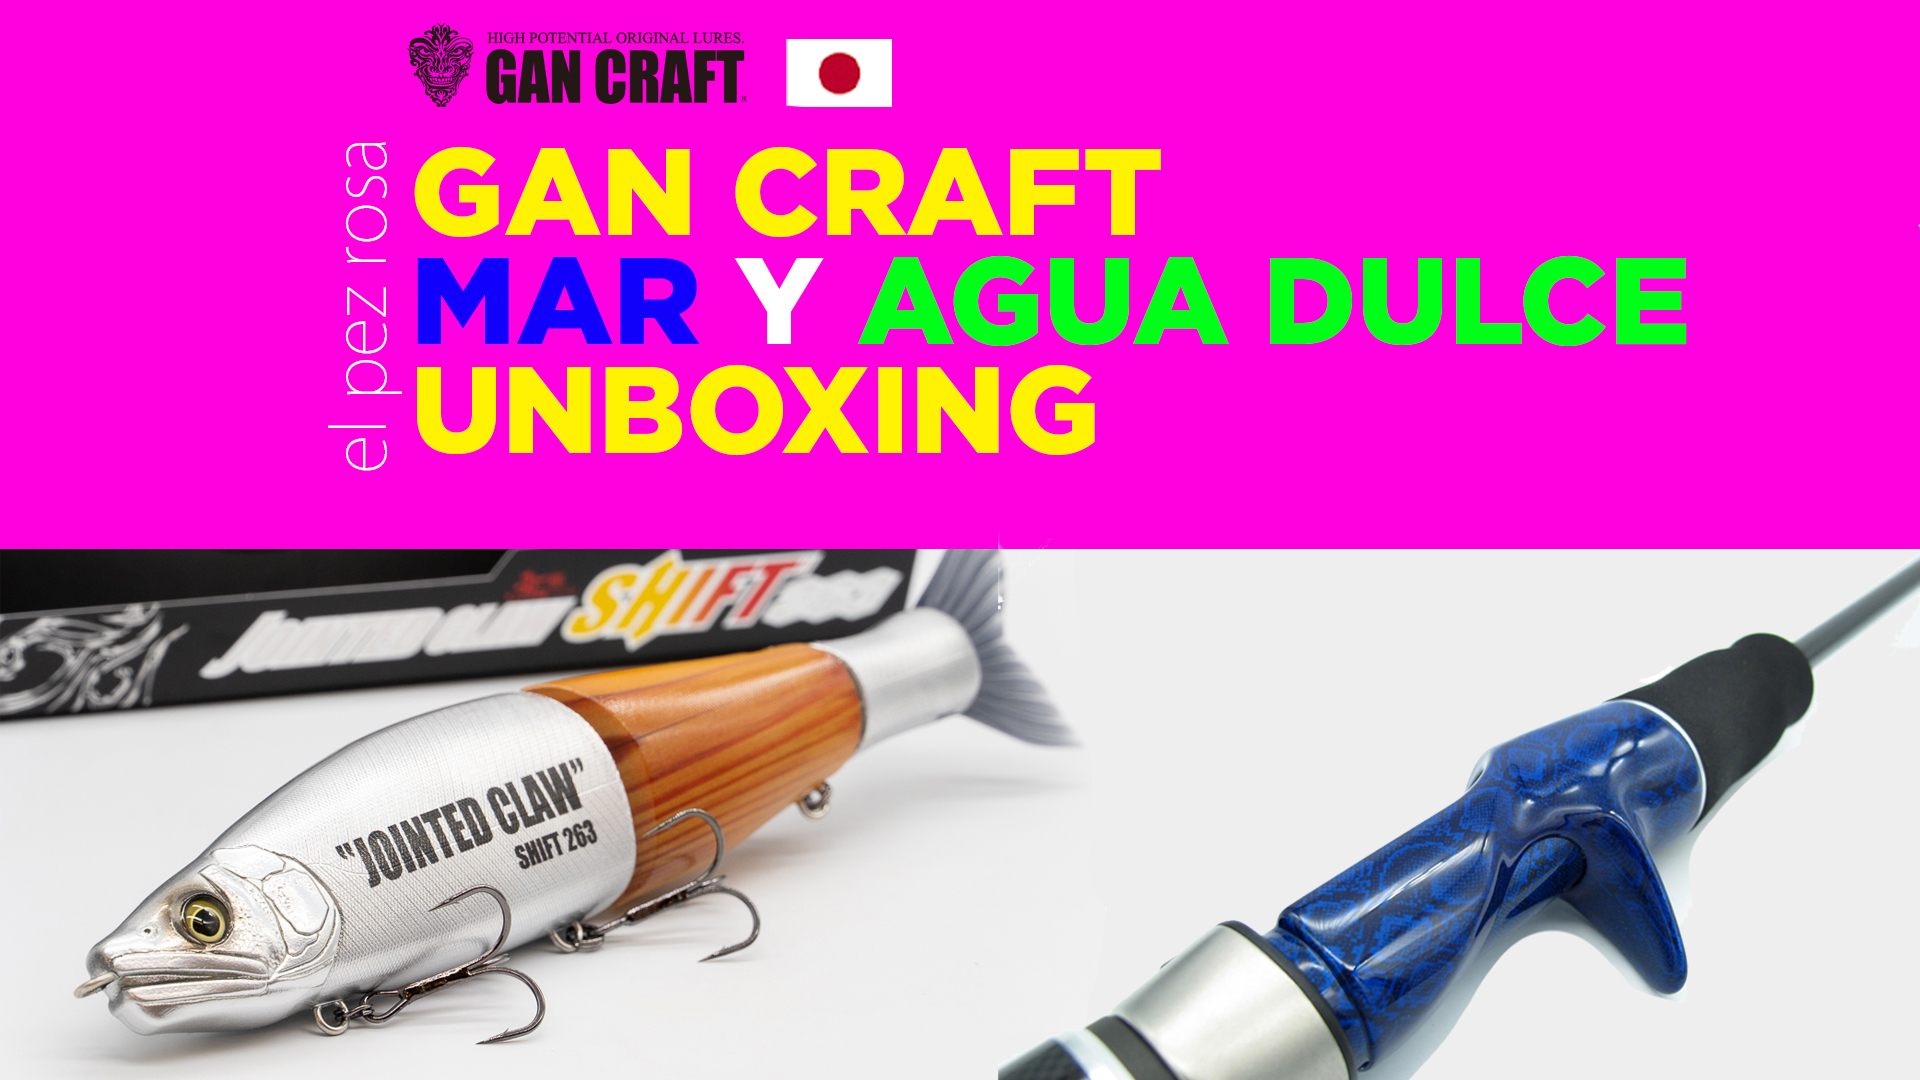 Gan Craft: Jointed Claw Shift 263, Ocean Killers, Coso Jig. Unboxing